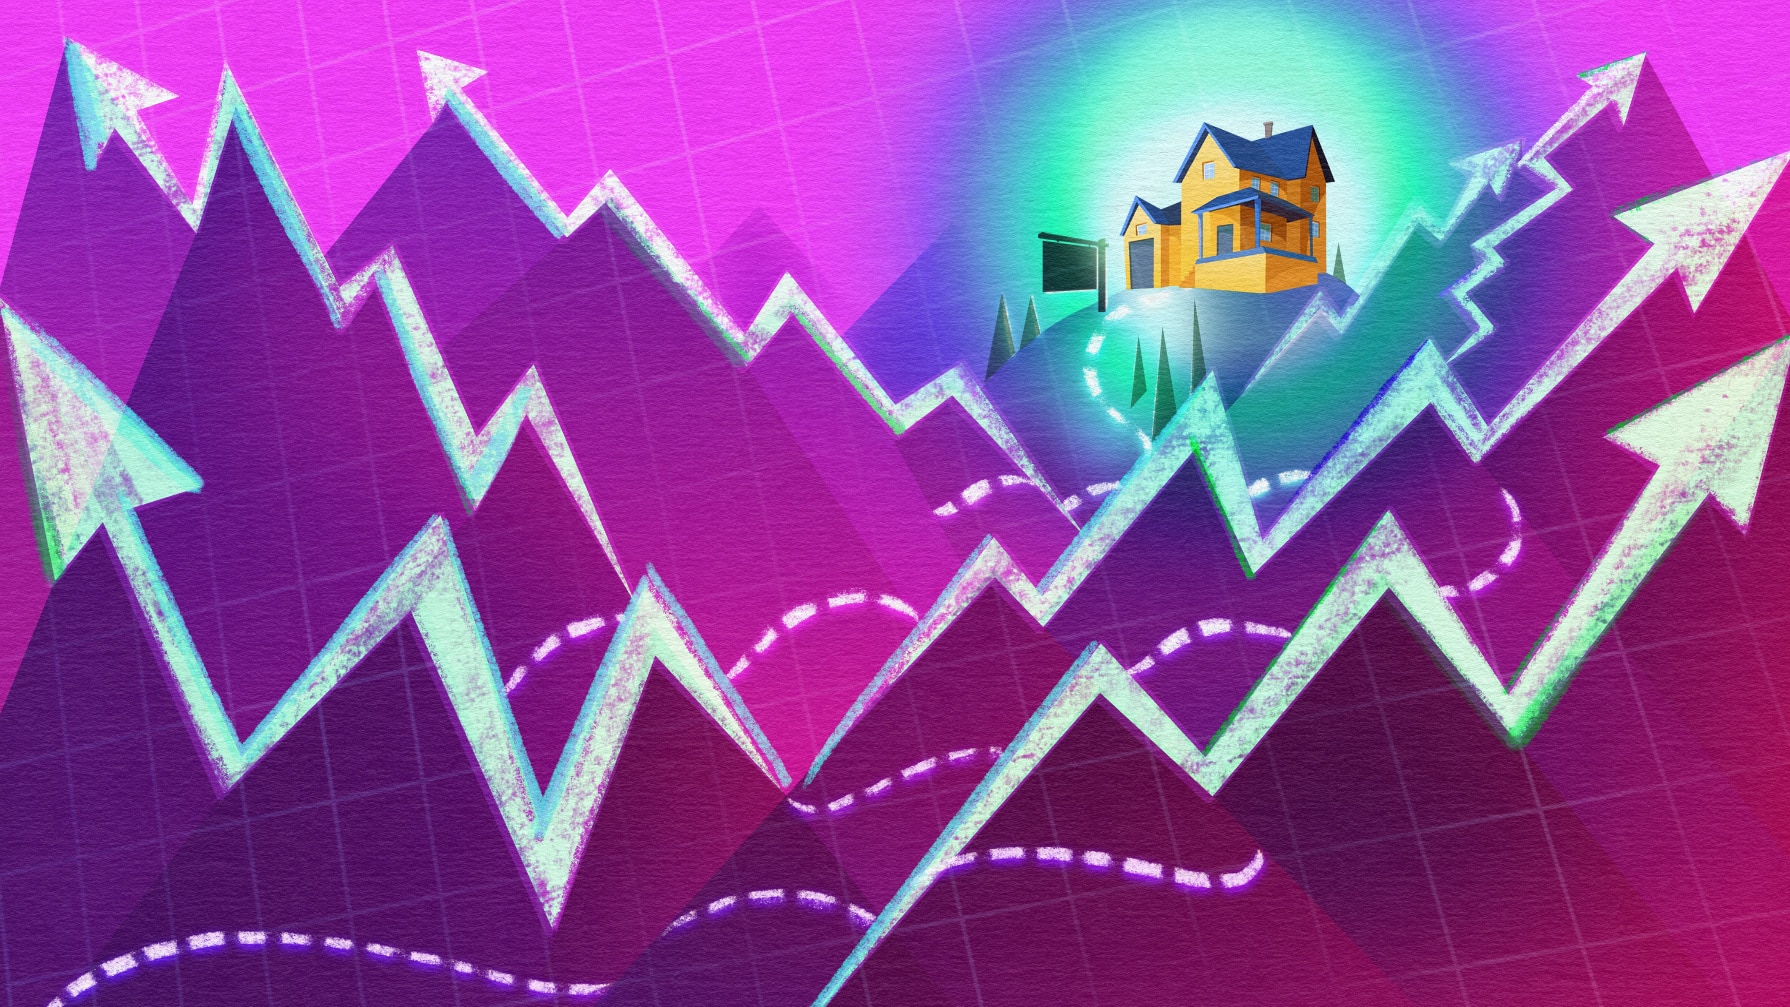 Illustration of a house high in the mountains, where the mountain peaks look like stock market arrows.